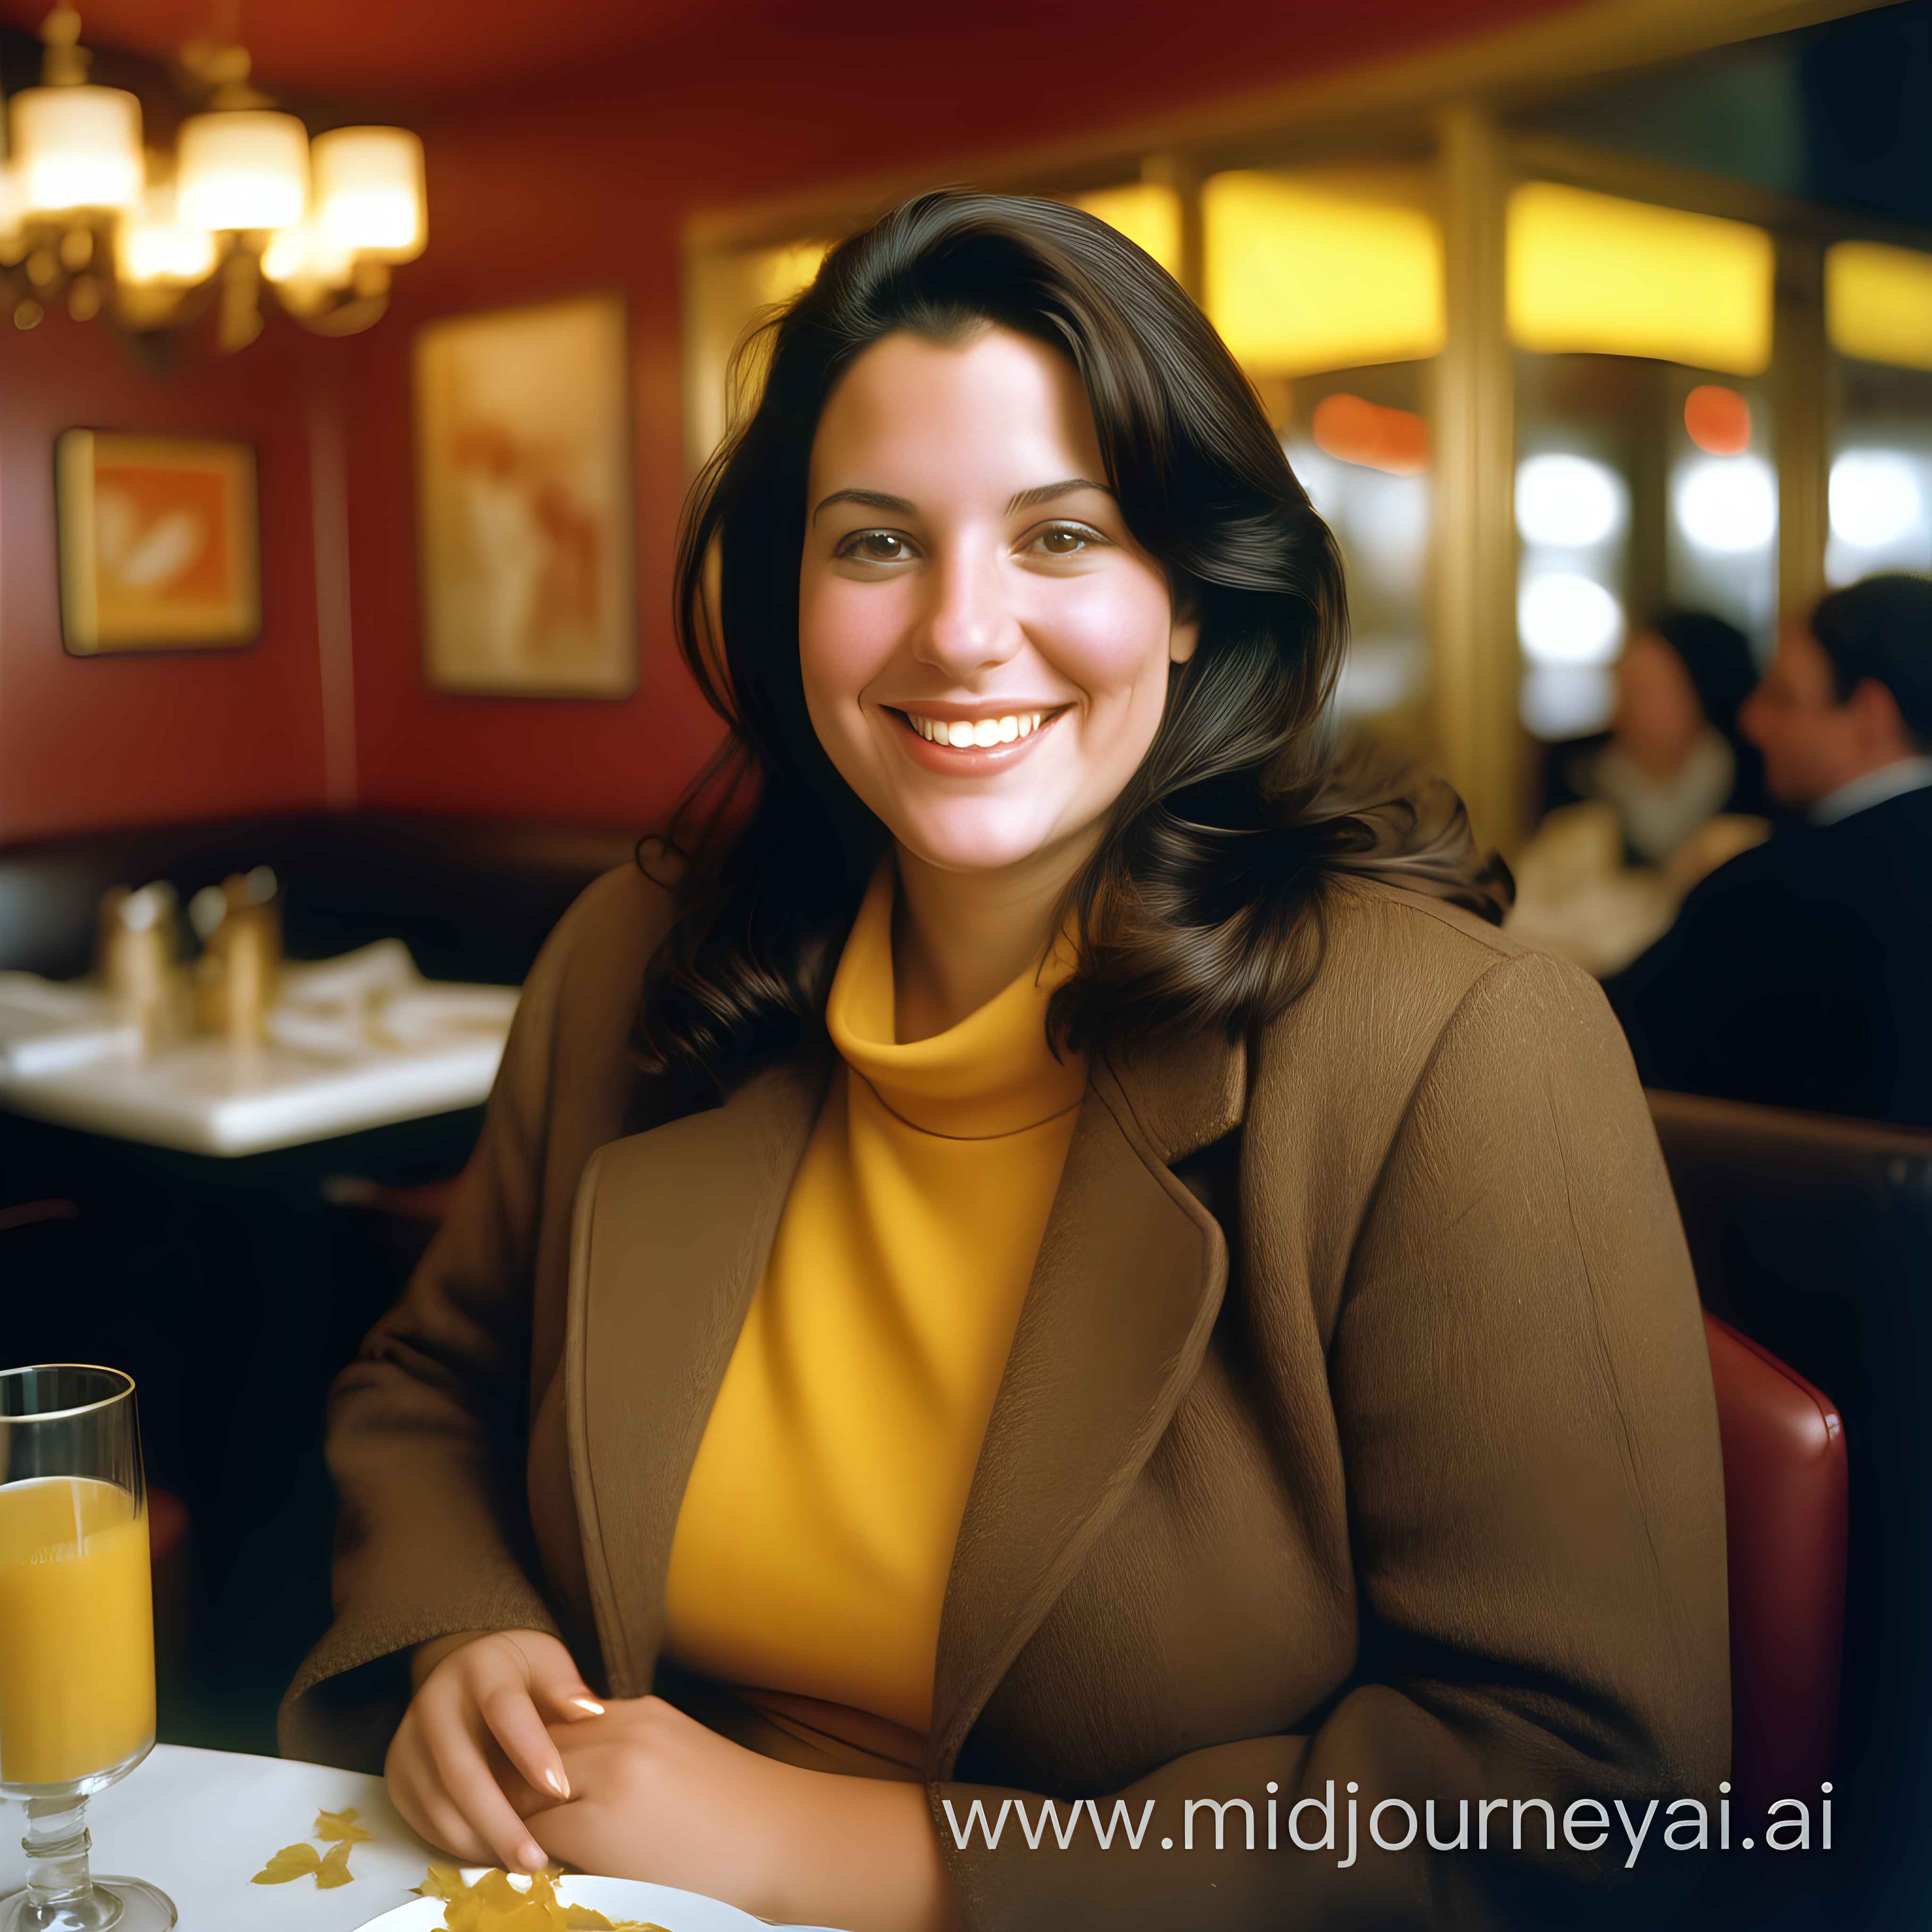 Create a modern clothed brunette expressive smiling woman using kodak gold 400. Put her in a Manhattan resturant. Make her slightly more chubby and colourful. Add more autumn clothing. Make her even more chubby and modern. Add even more wheight on her and make her around 35 years old.